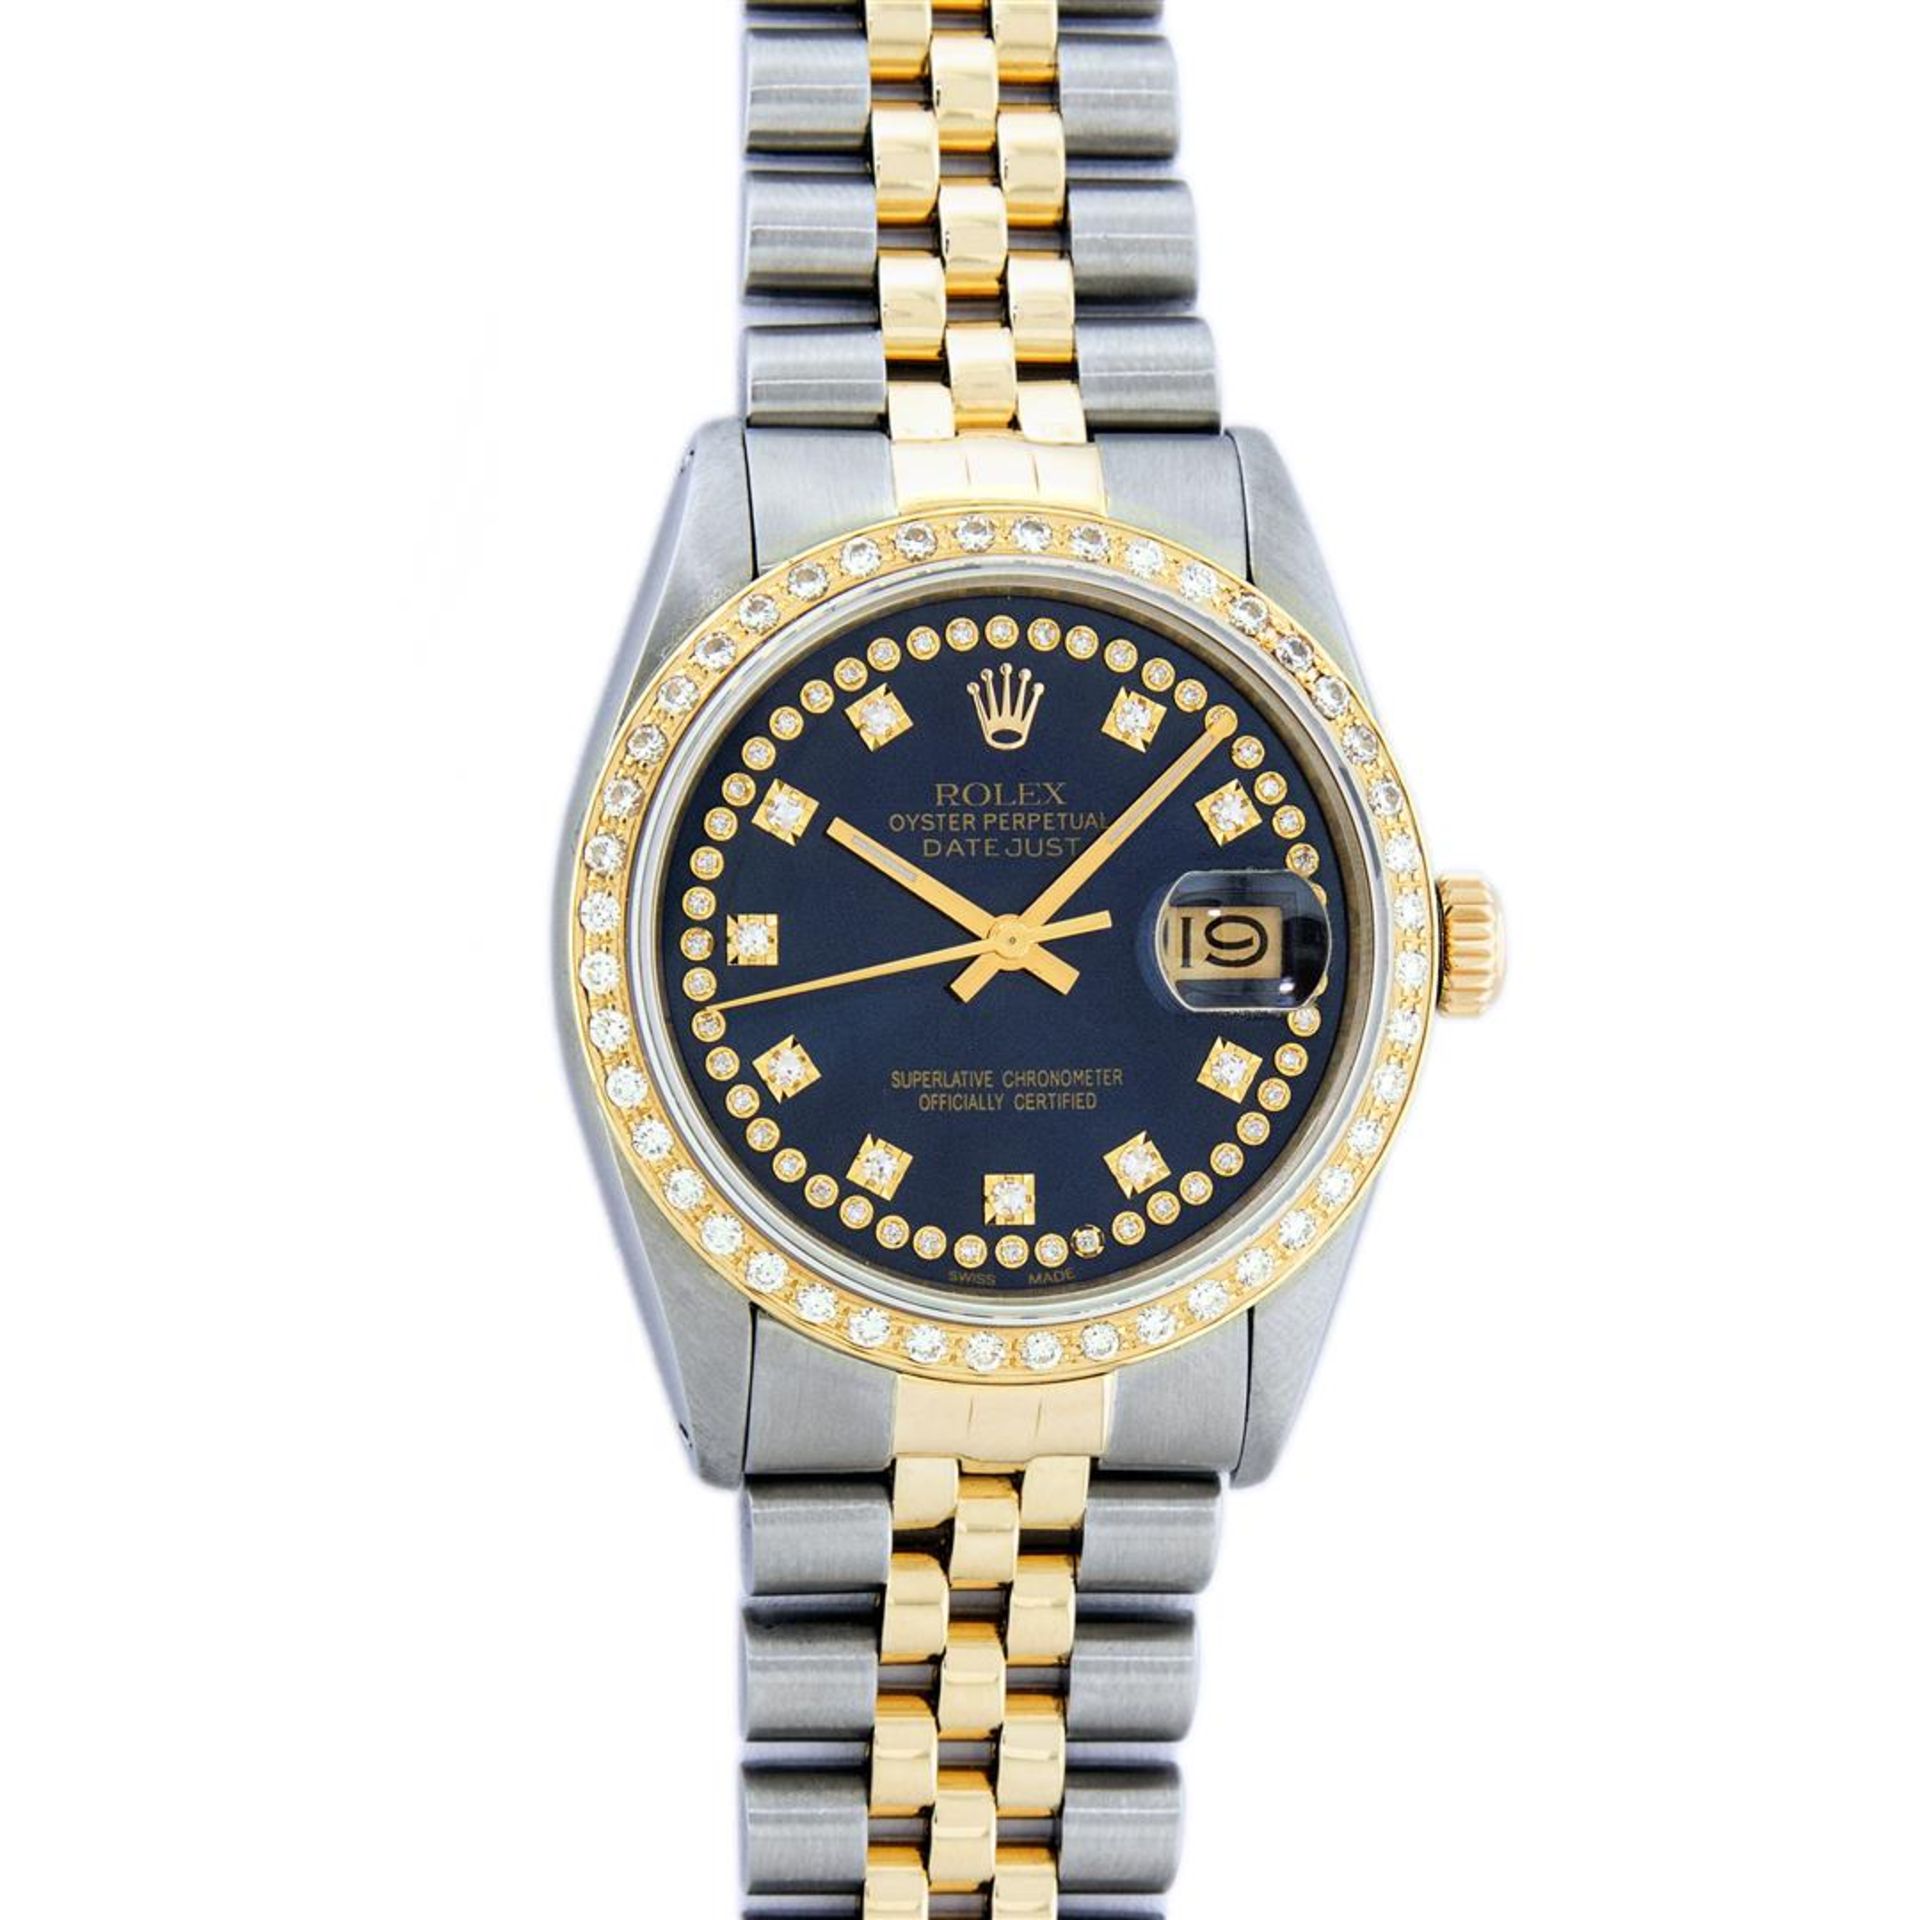 Rolex Mens 2 Tone Blue String VS Diamond Datejust Wristwatch Oyster Perpetual - Image 2 of 9